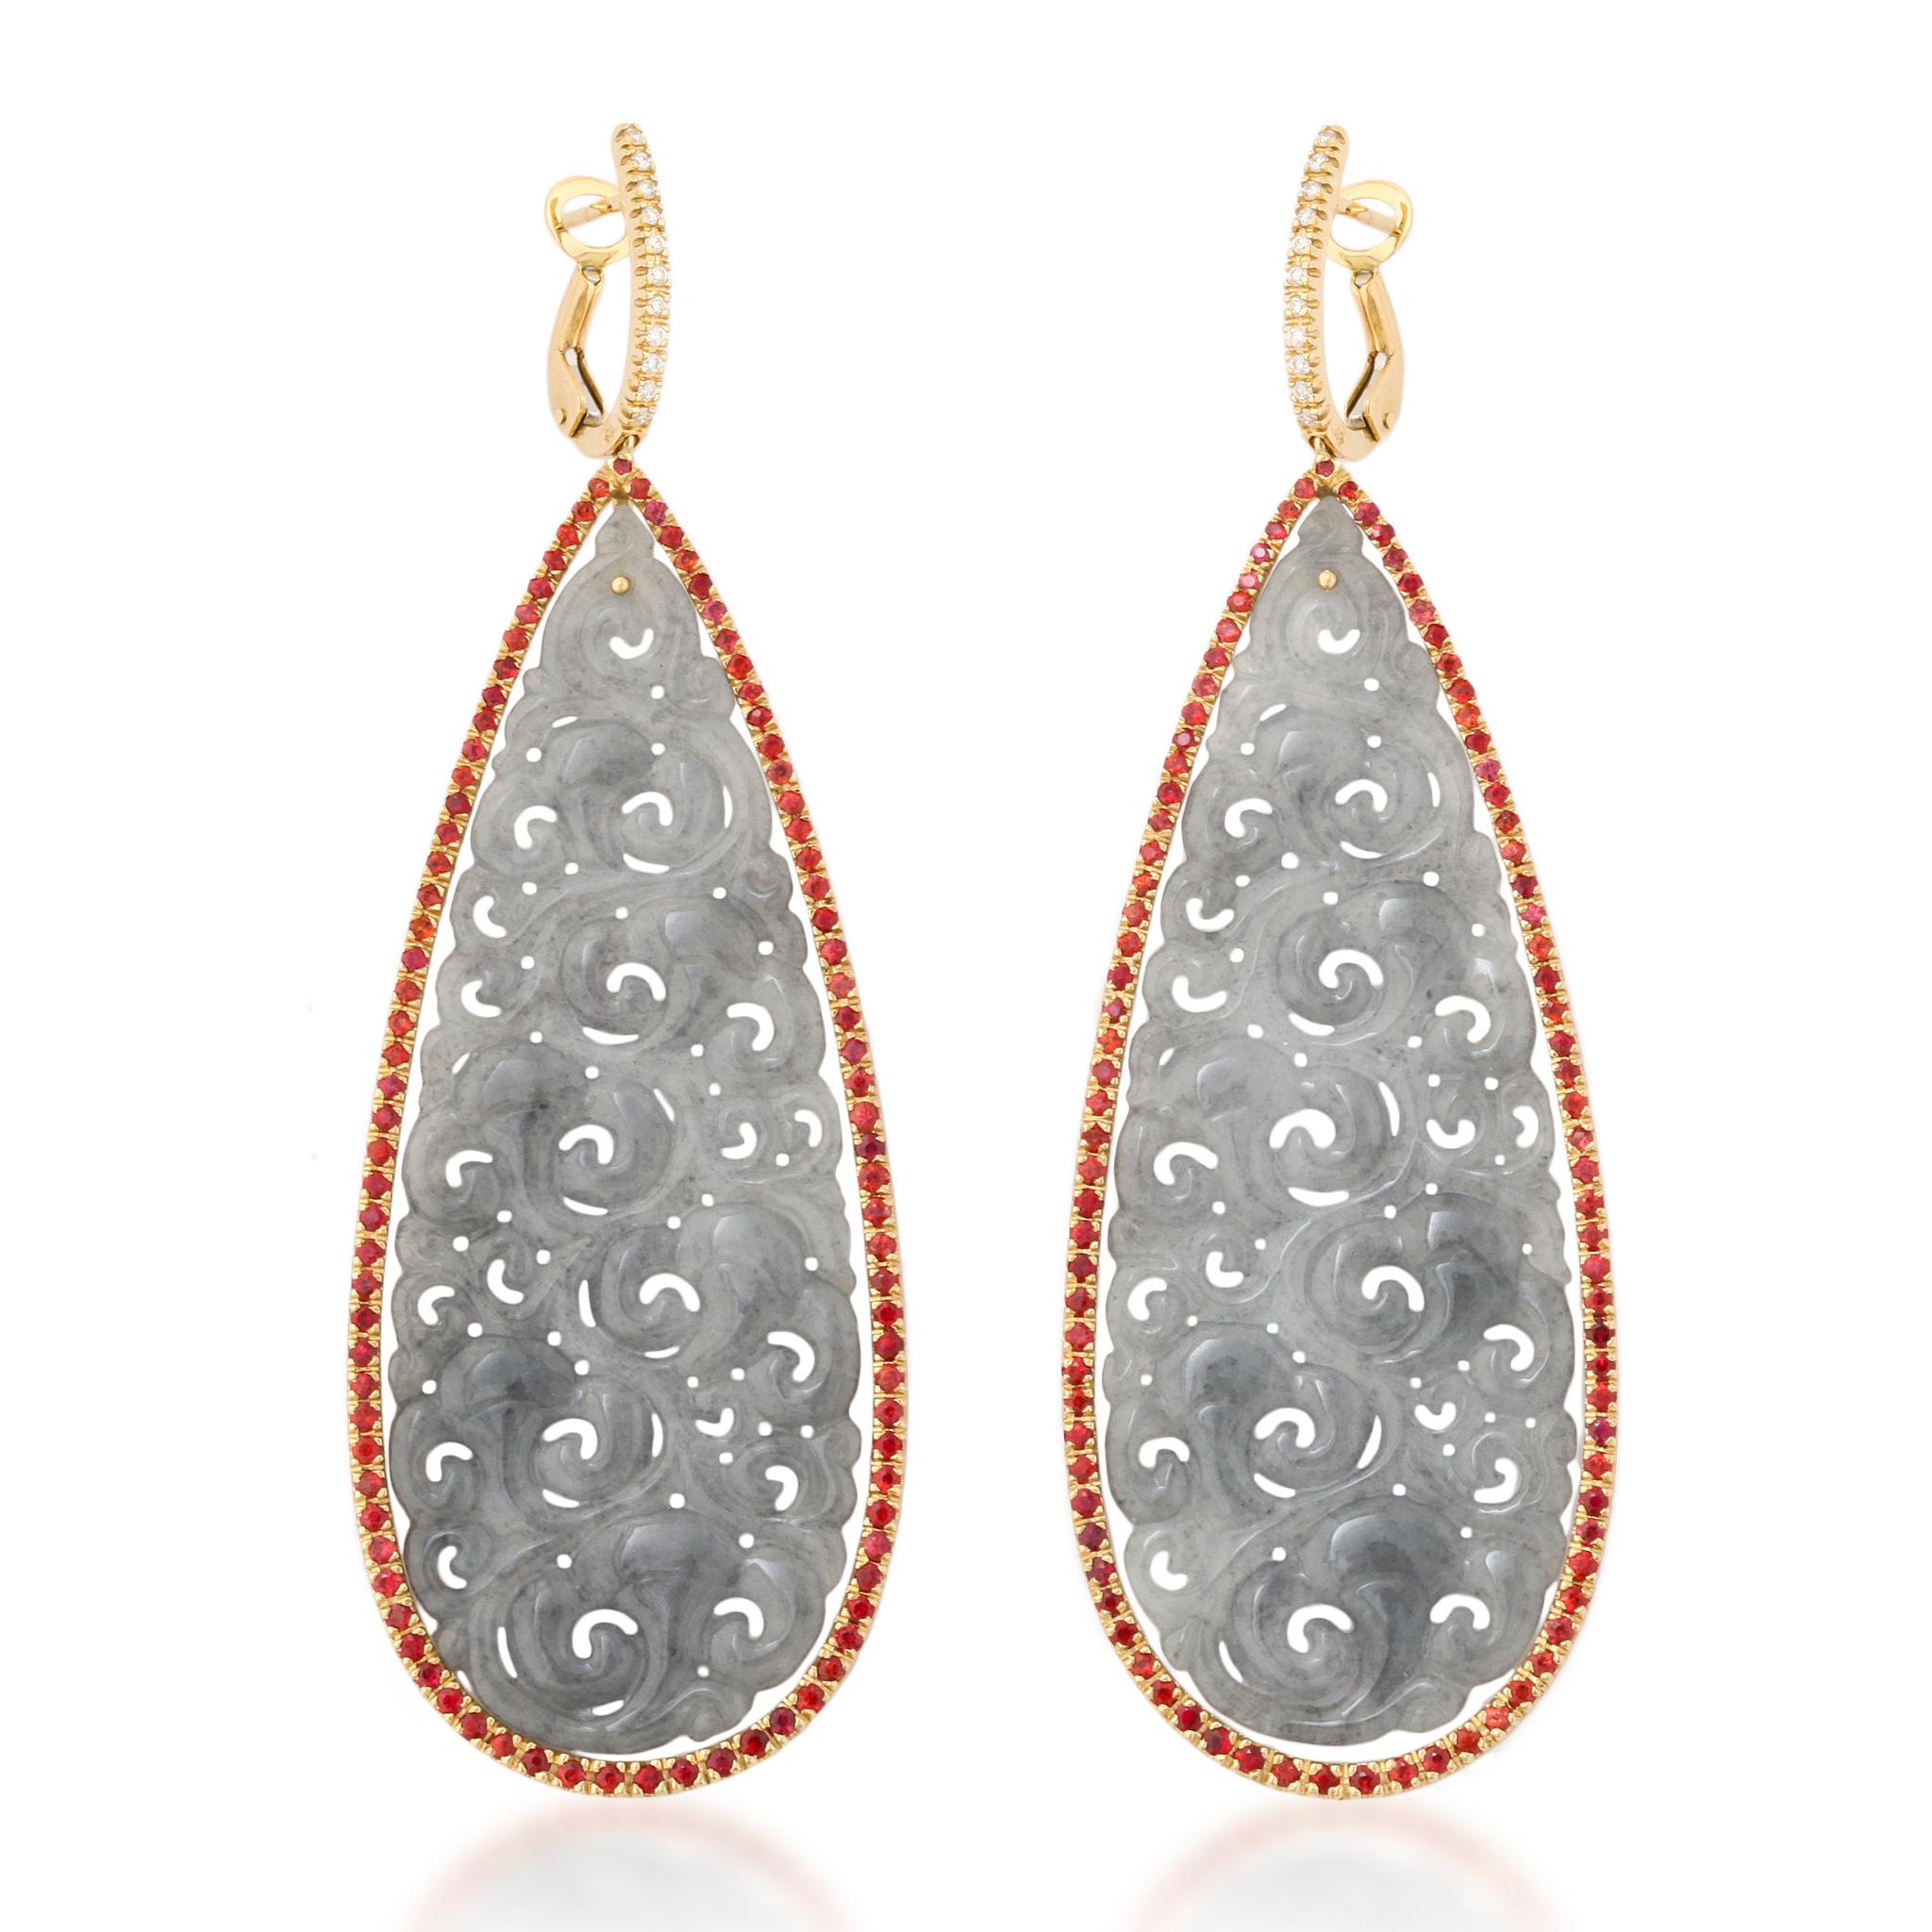 Dramatic and bold 18kt gold carved icy gray jade earrings, meticulously handcrafted in Italy. The unique design features vibrant orange sapphires and scintillating diamonds, delicately set to frame the perfectly matched and expertly carved icy jade